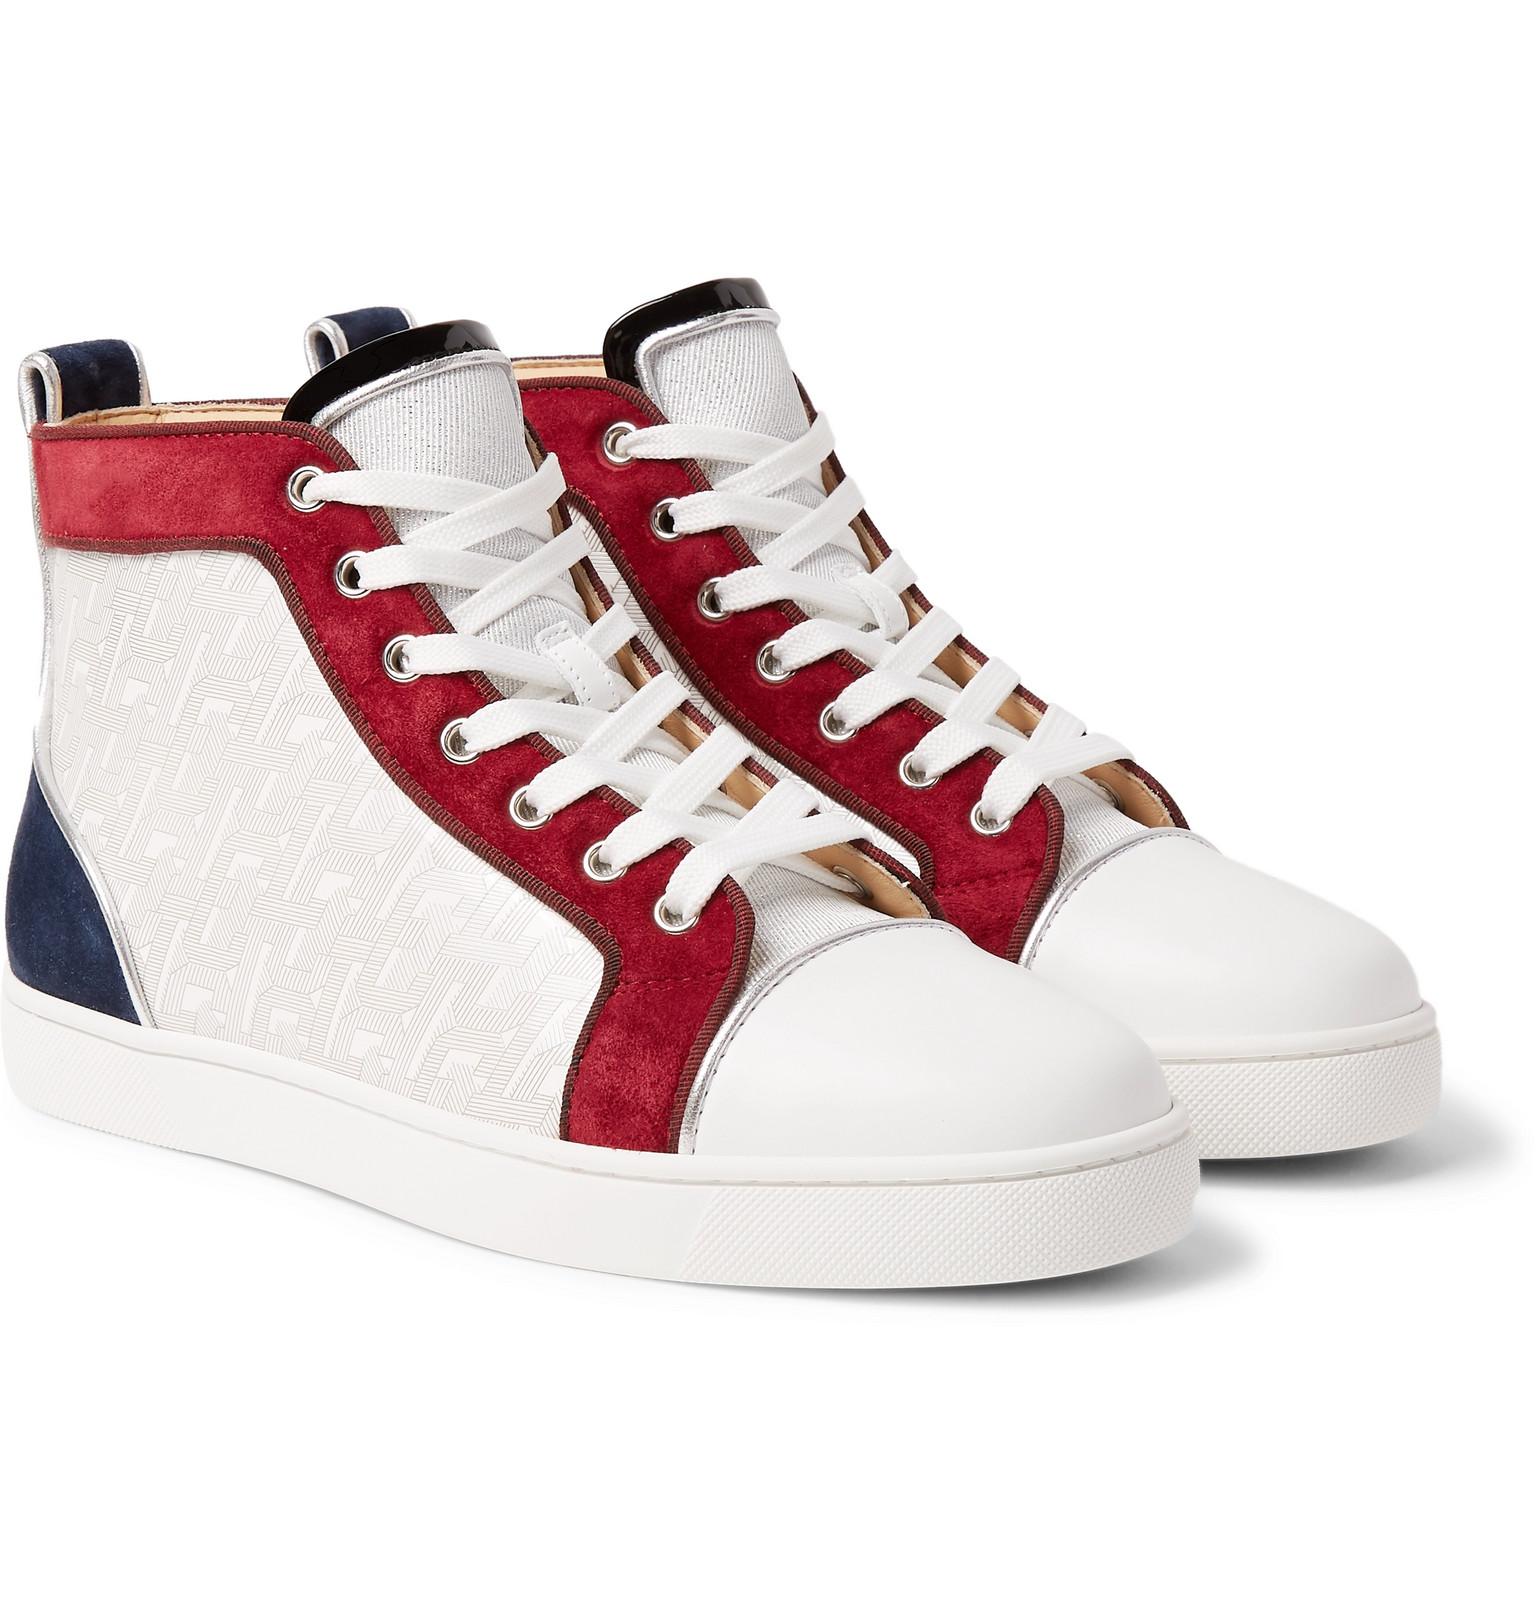 Christian Louboutin Louis Orlato Suede, Leather And Denim High-top Sneakers White for Men - Lyst